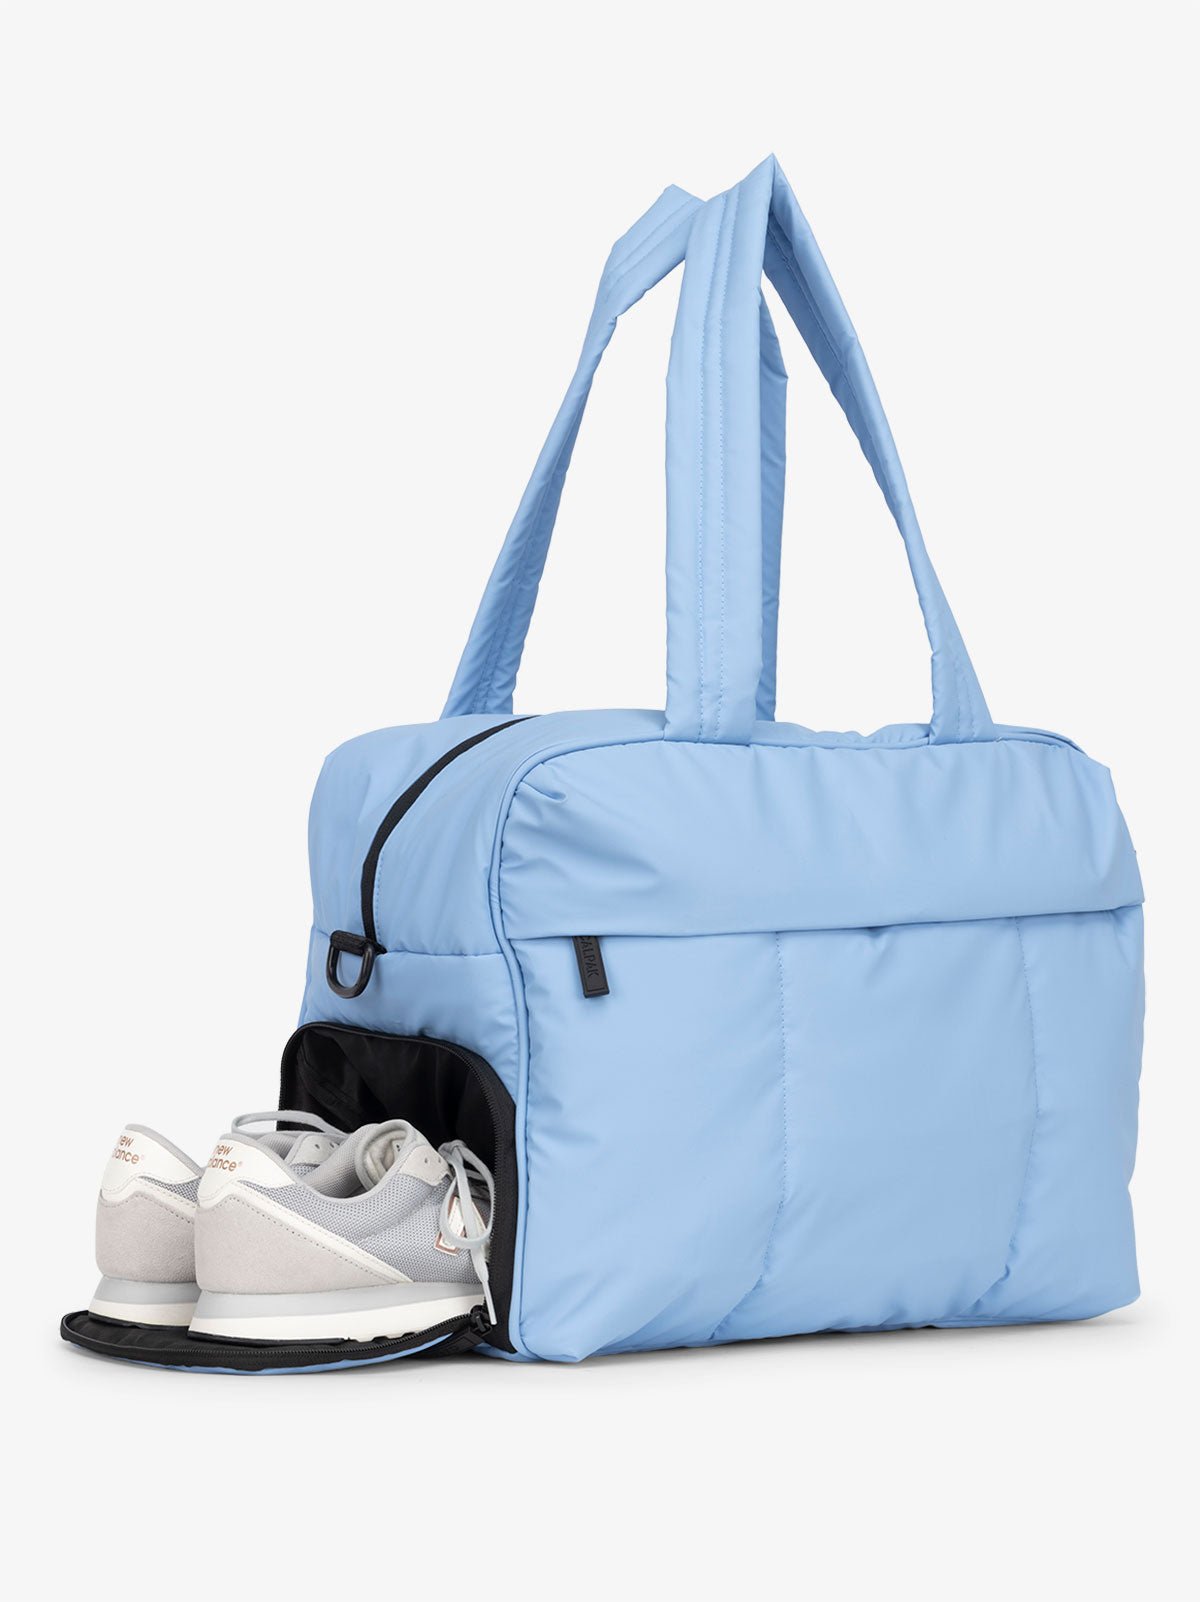 CALPAK Luka Duffel Bag with side shoe compartment and top handles in light blue